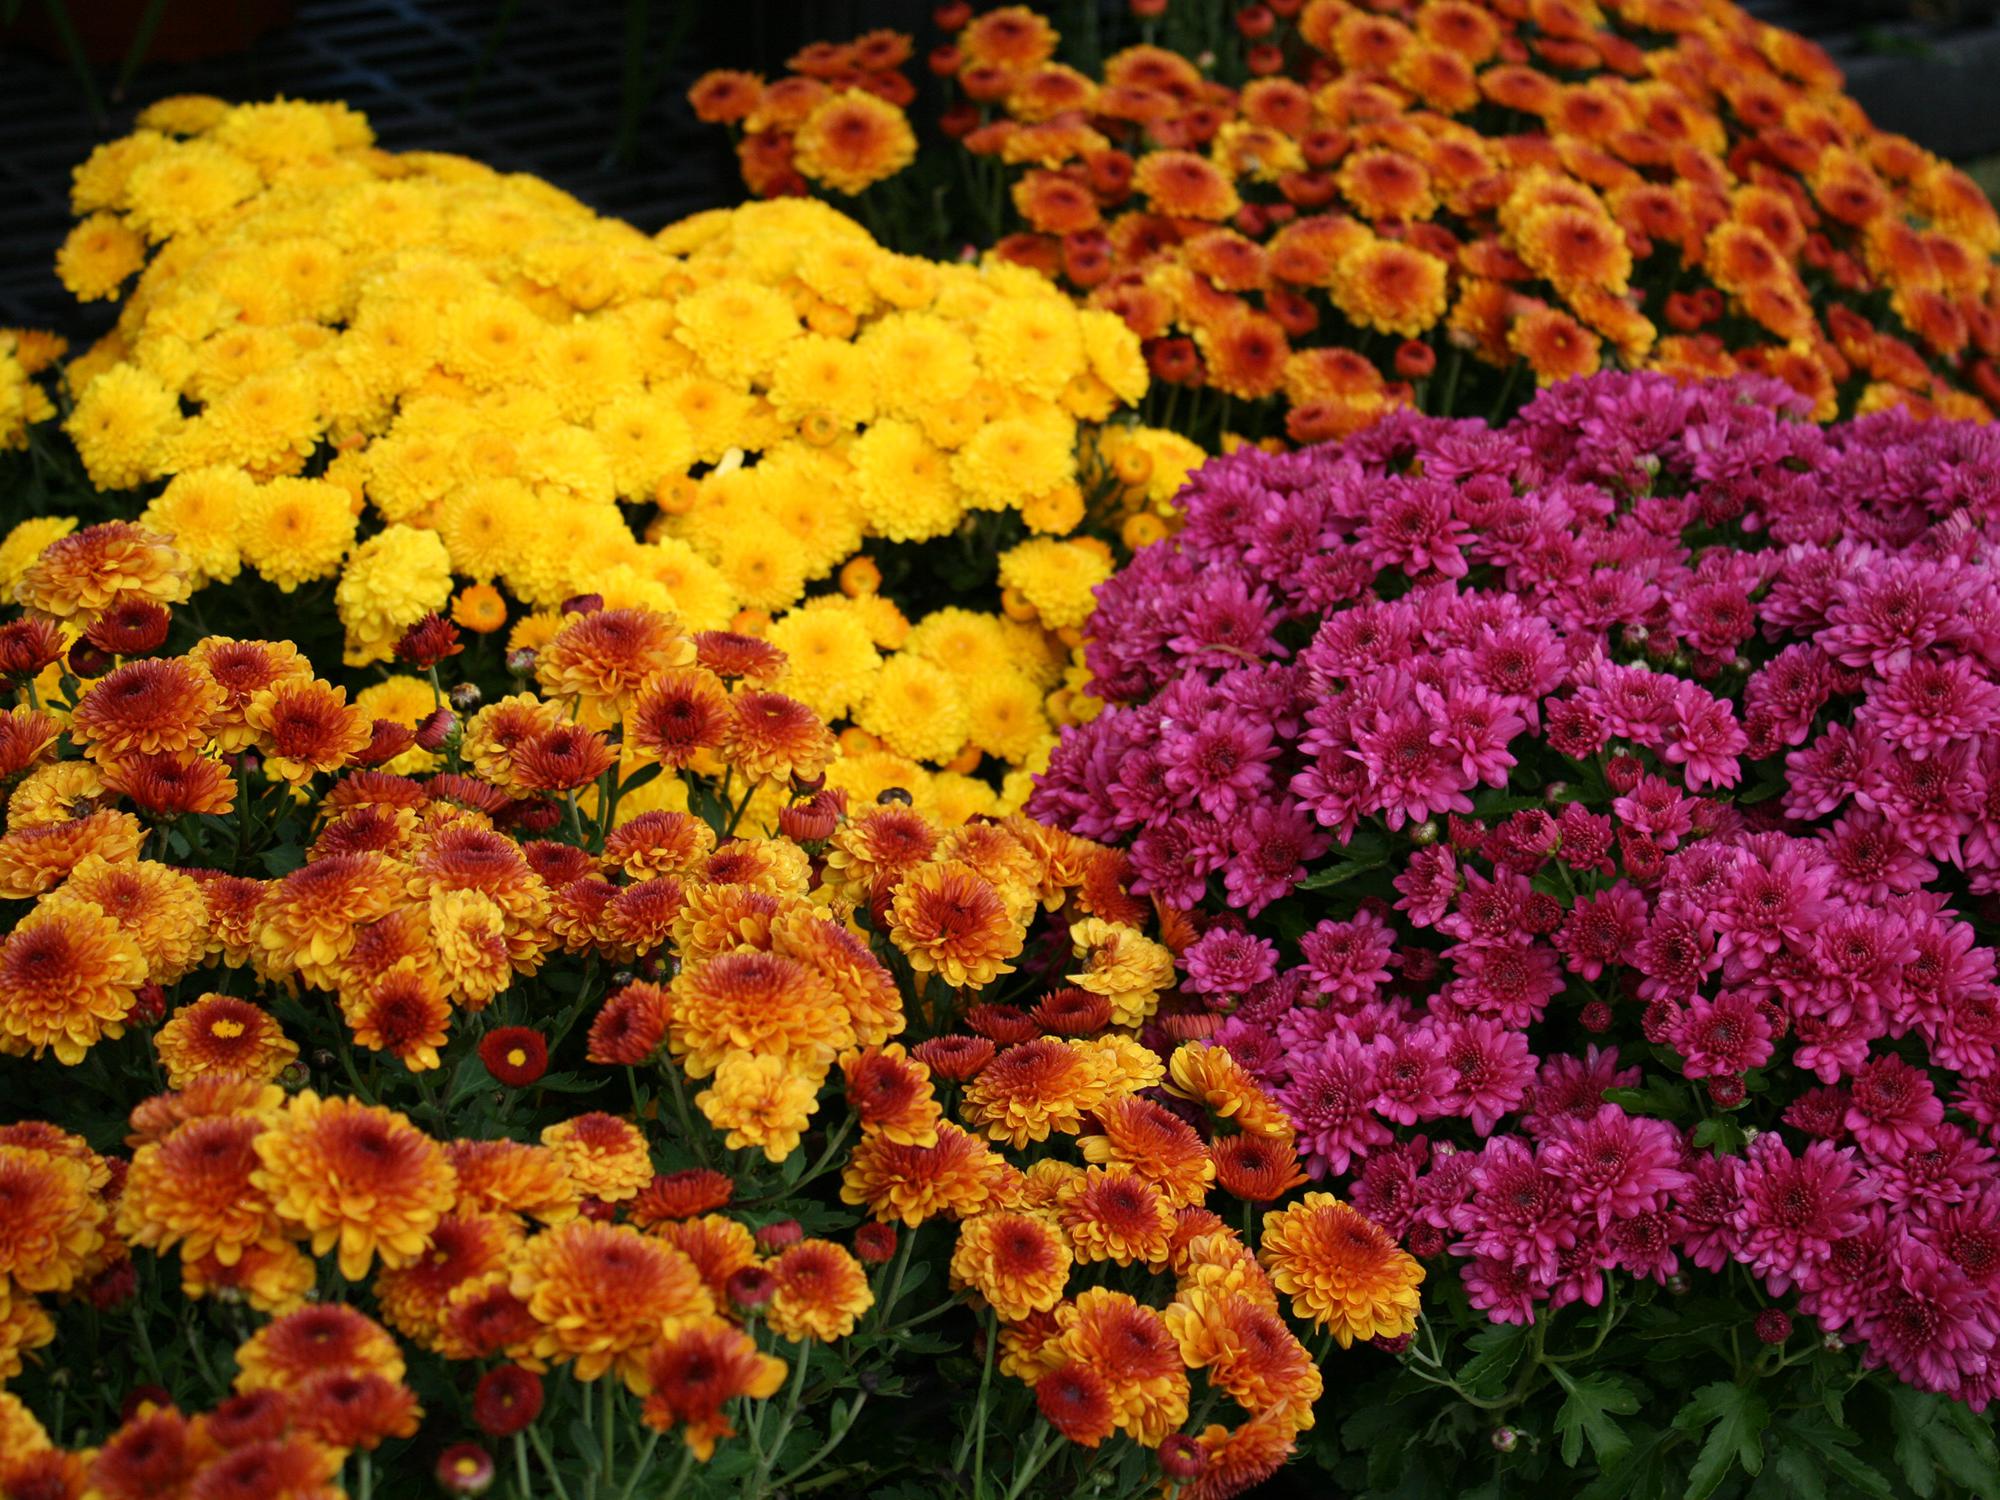 Two yellow and orange mums bloom on either side of a yellow mum and a purple mum.